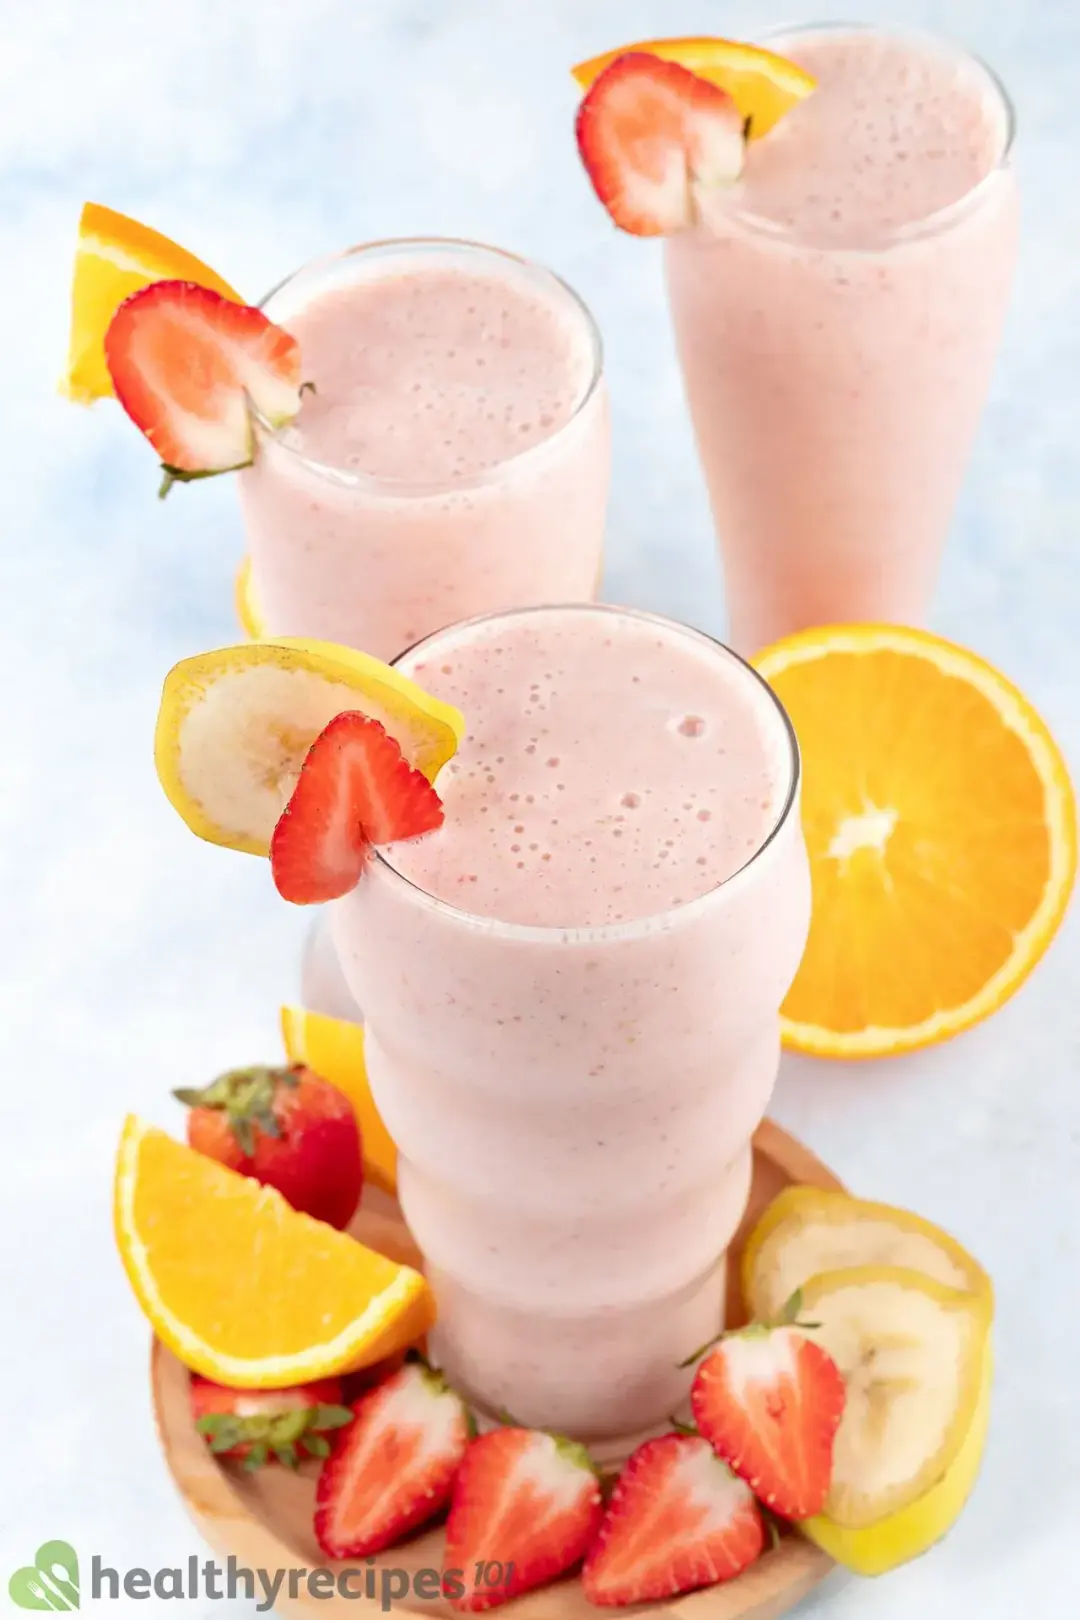 Strawberry Banana Smoothie Recipe for a Quick, Healthy Breakfast